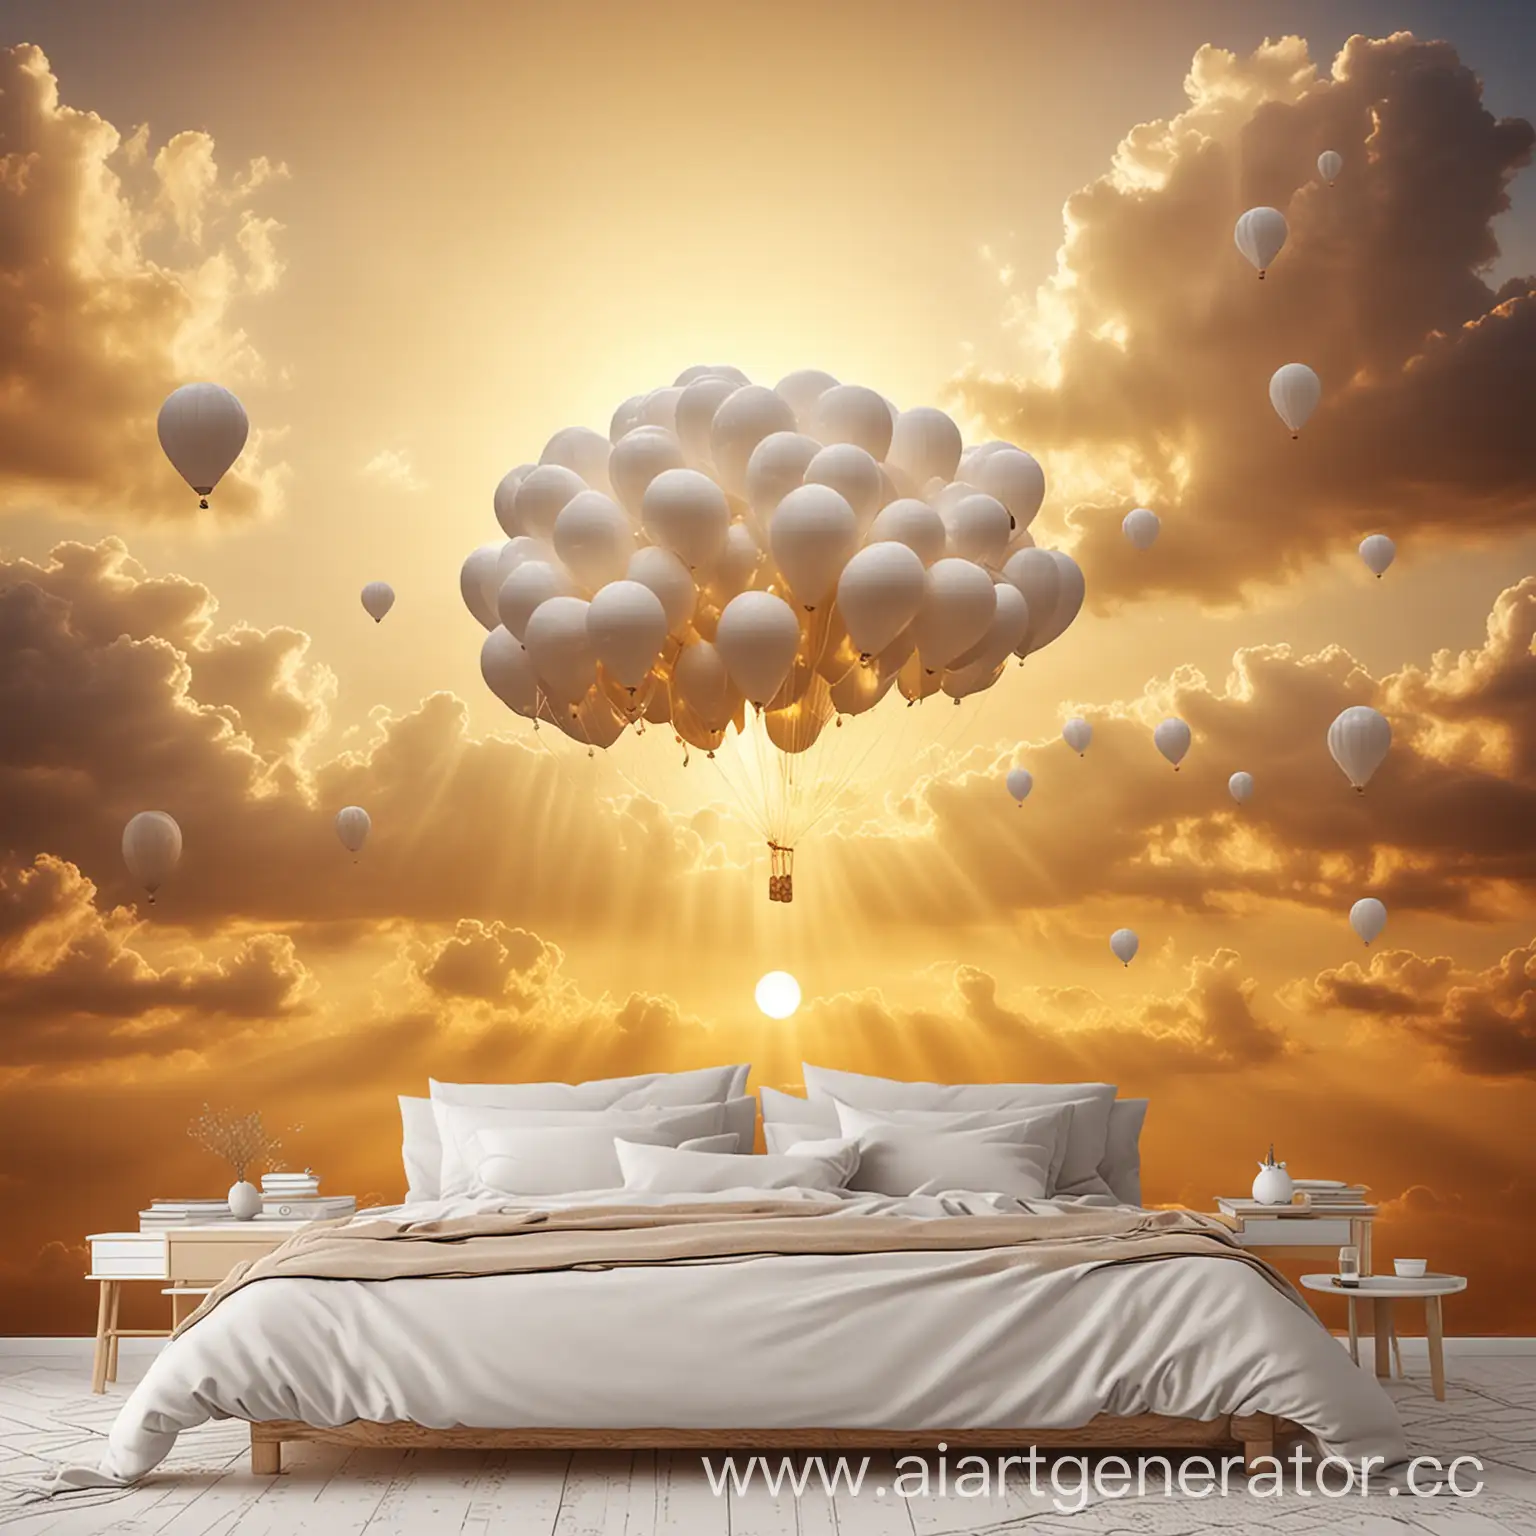 Golden-Sunset-Tranquil-White-Cloud-Balloons-in-a-Cozy-Sky